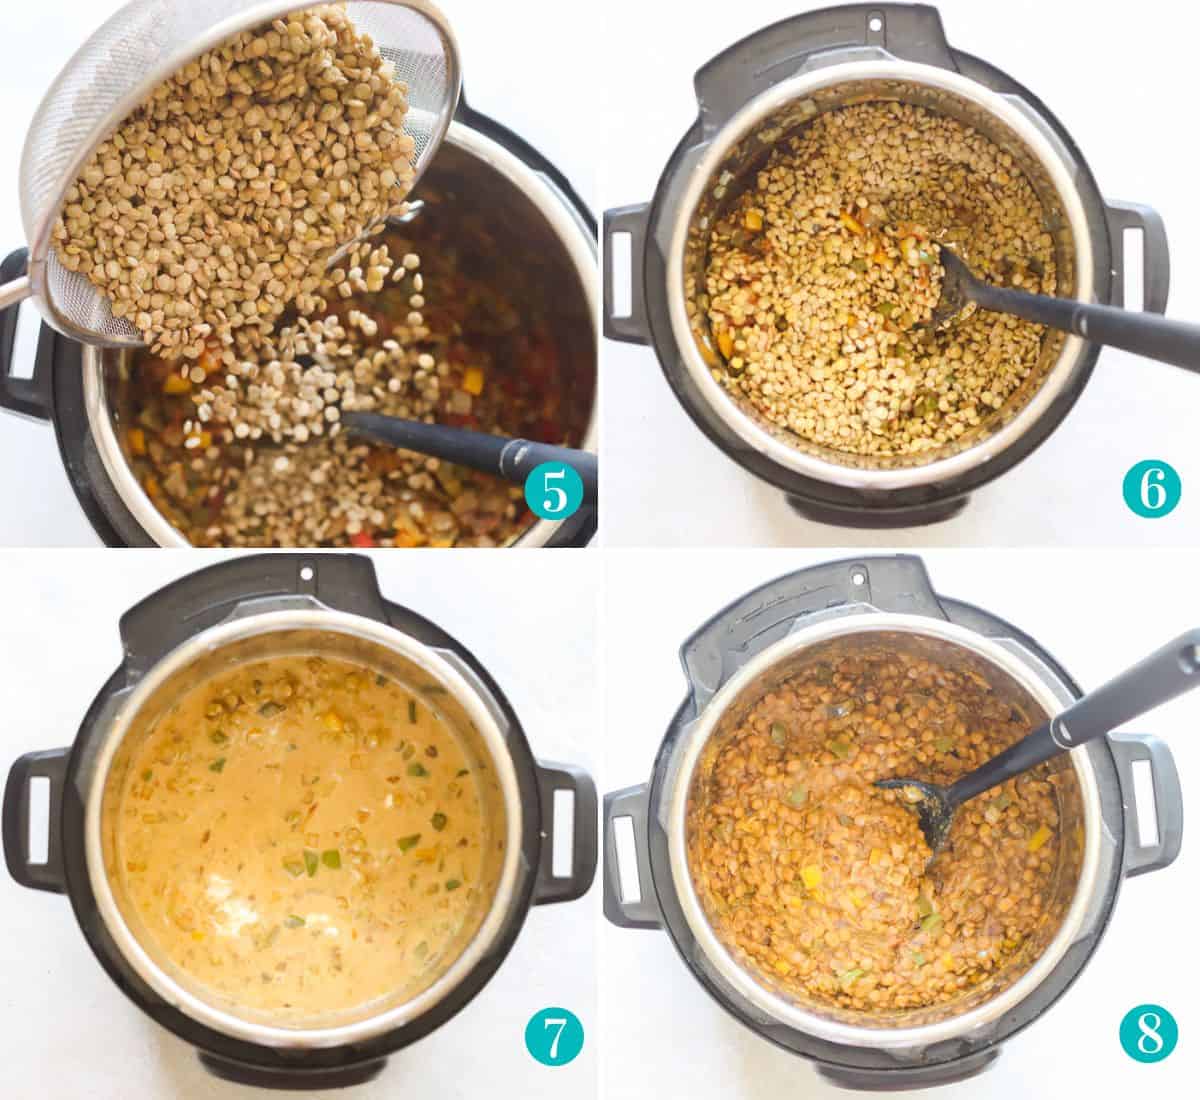 four photo collage with lentils being poured into the instant pot, lentils stirred into veggies, coconut milk added to the pot, and the lentil curry after cooking in the instant pot.